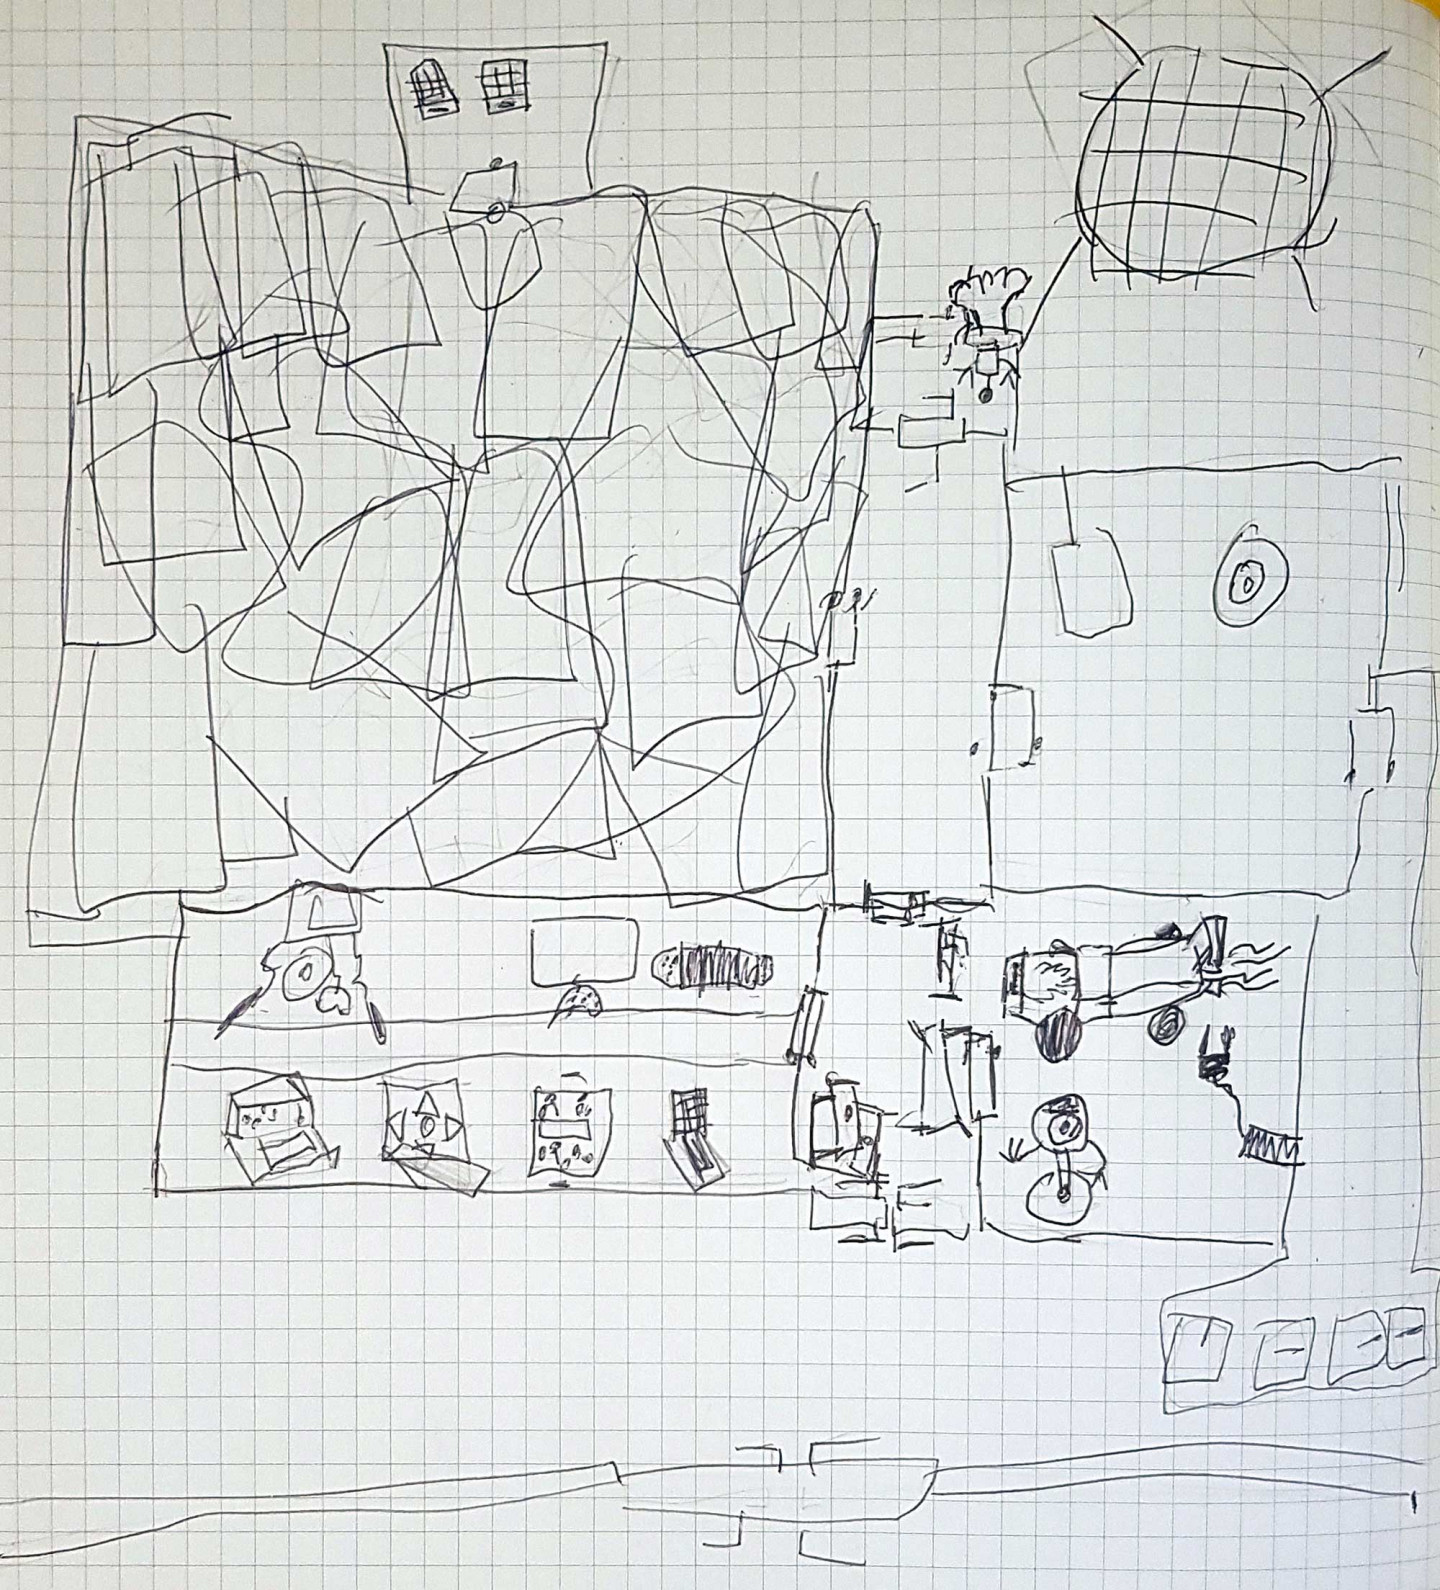 DIEGO, AGE 9. Diego
Age: 9
A home for Beast Boy from Teen Titans to Go. I couldn’t think of a character so my mum suggested Beast Boy.
I listed all the things he likes:
• Video games
• Ice cream
• Tofu
• Cyborg
• Sleep
• Pizza
• Shape shifting
I then listed a few rooms he would need in his house for those things
- an arcade with the top 5000 most popular games on
- a room with lots of freezers filled to the brim with ice cream
- a room with 2 infinite tofu vending machines
- a room filled with robots and chargers when a cyborg comes to visit. The house is made of limestone bricks and spruce wood tiles coated in plastic, some black stained glass windows and wooden for door and window frames.